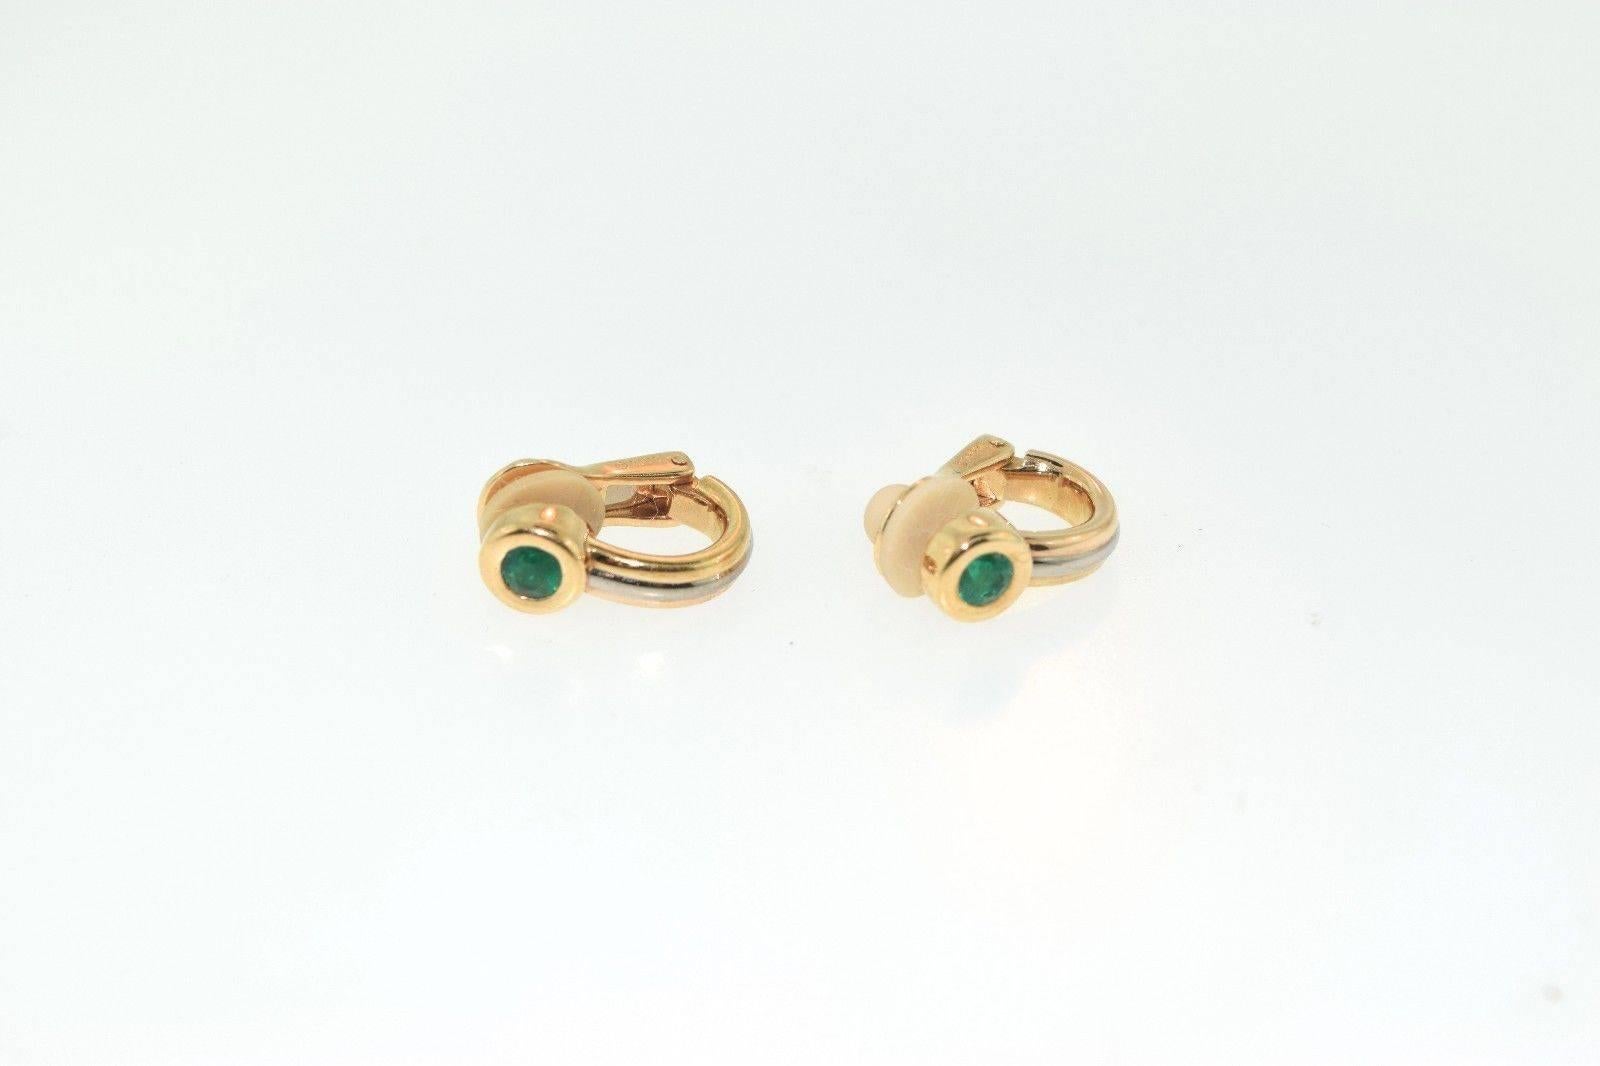 Cartier Signed Yellow Gold Hoop Earrings with Emeralds

About the Item:
Beautiful Bright Emeralds encrusted in a beautiful Cartier original setting of gold hoop earrings. No alterations or changes. Can be polished upon request. Stunning for